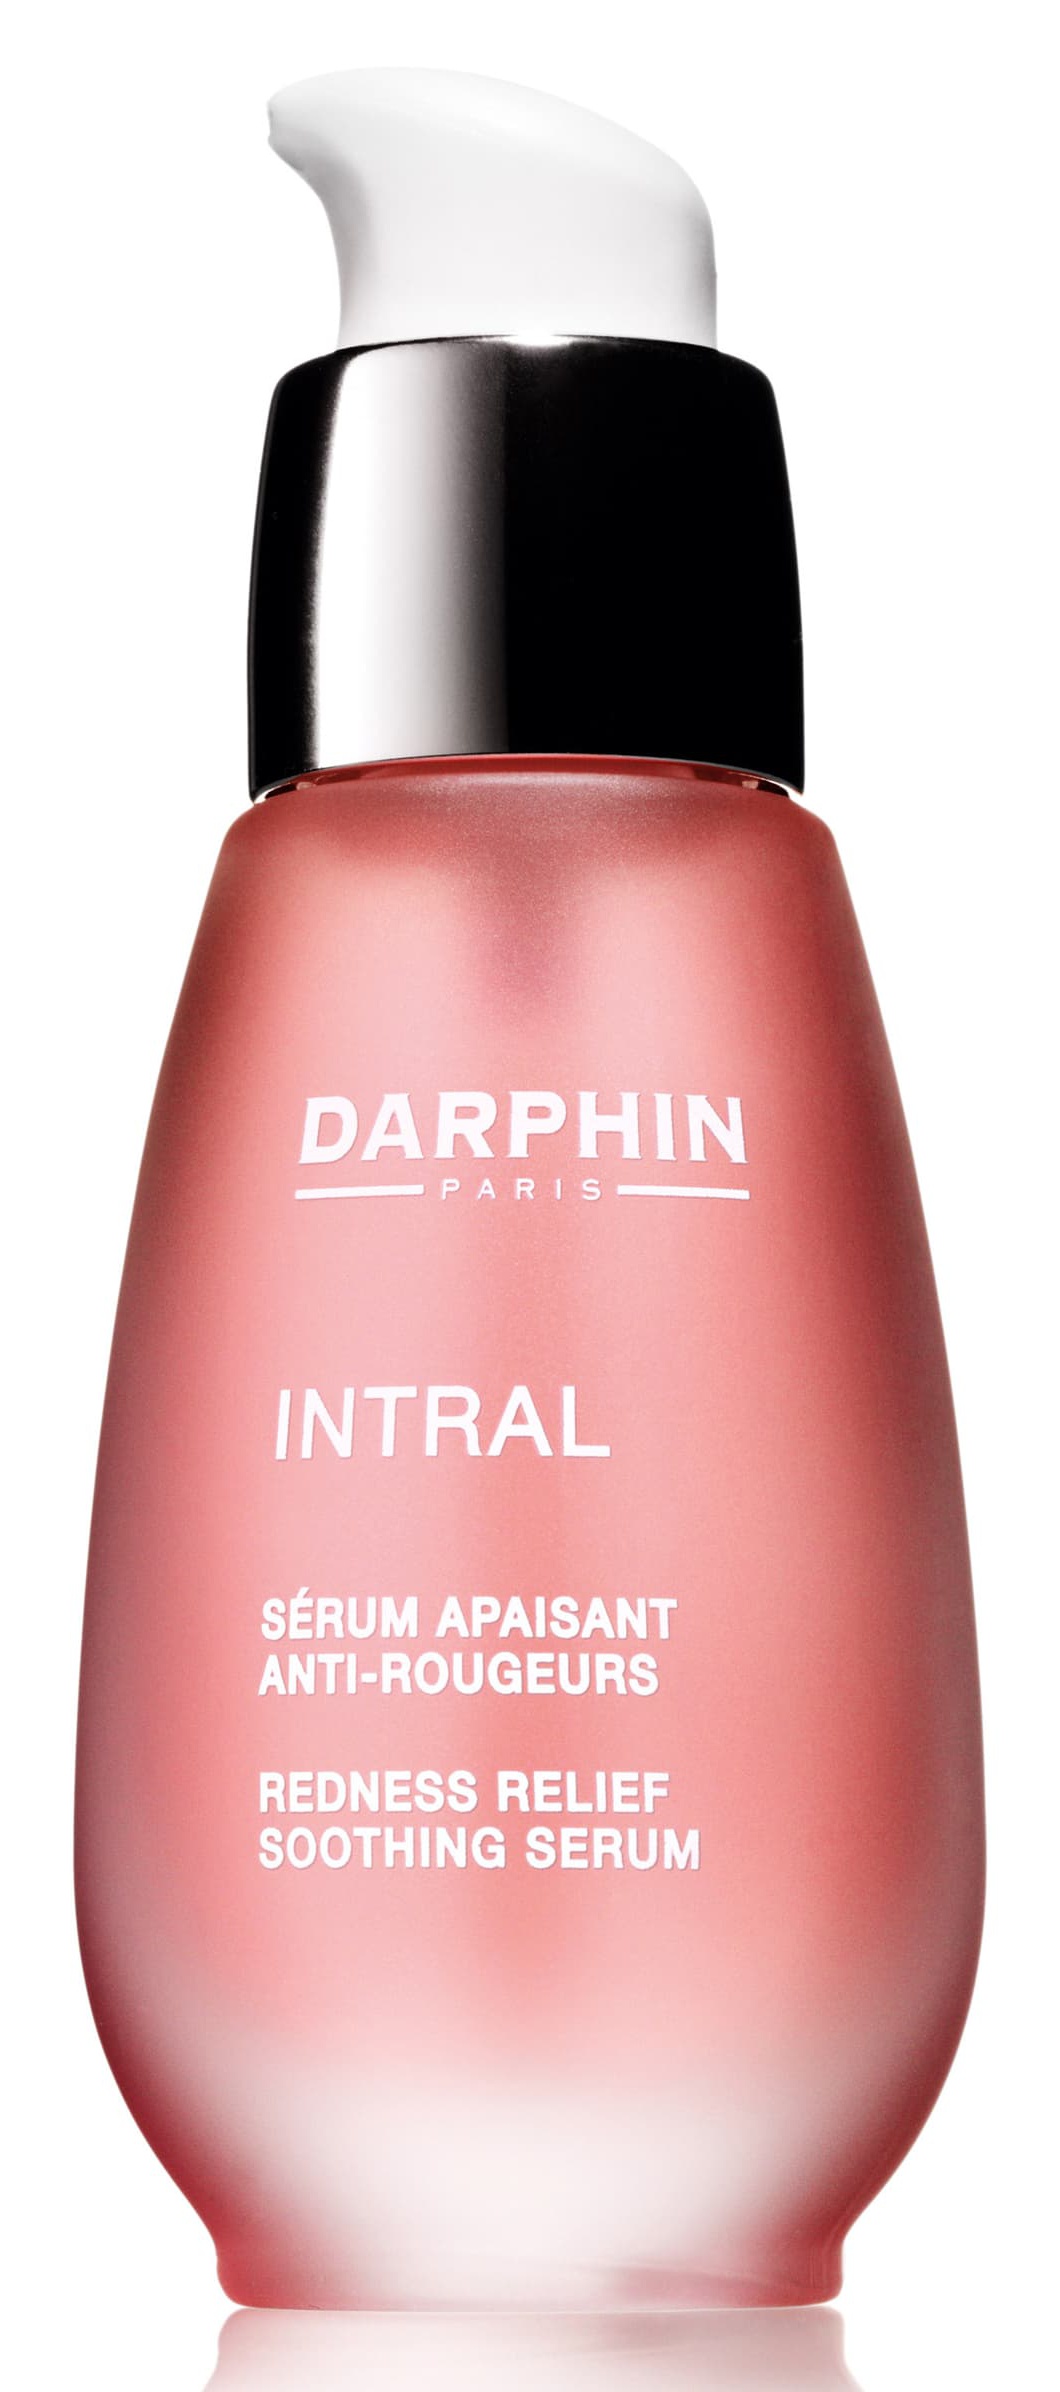 Darphin Intral Redness Relief Soothing Serum